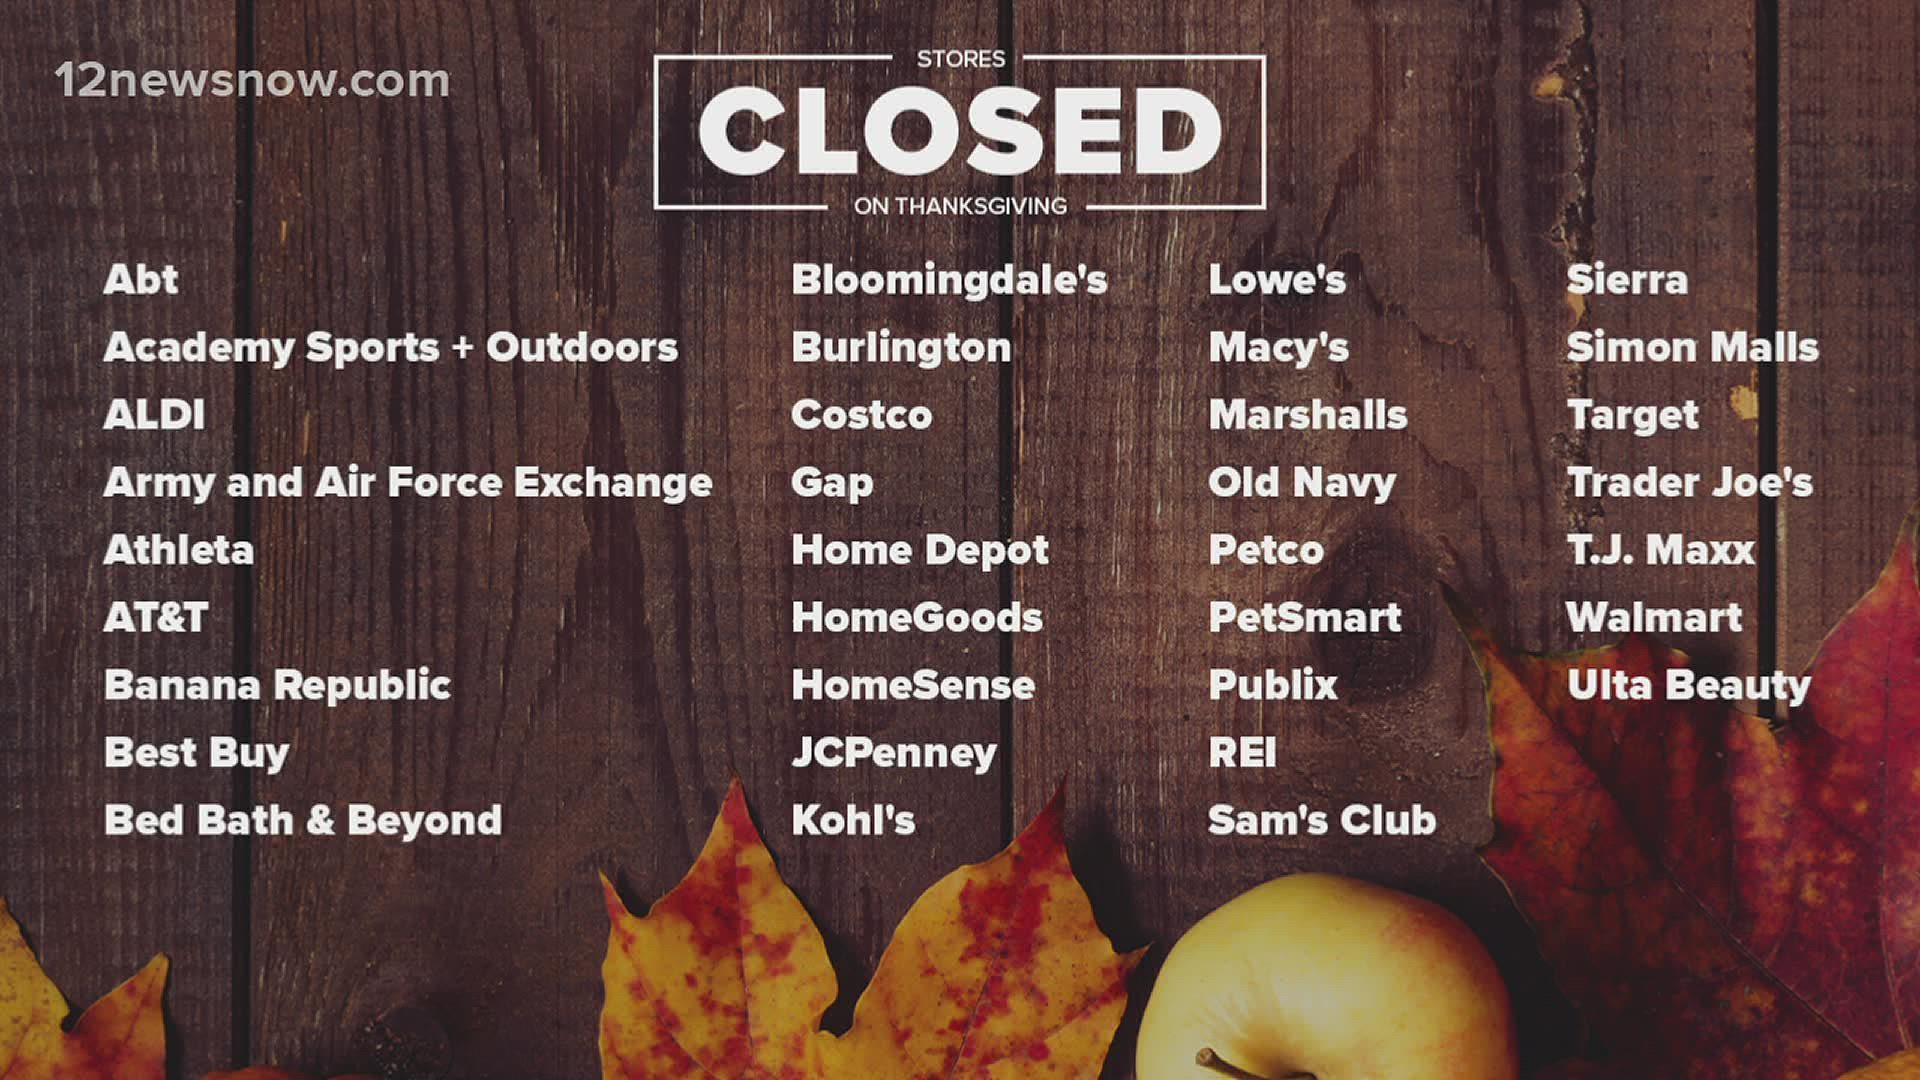 Some stores are closing for the Thanksgiving holiday.